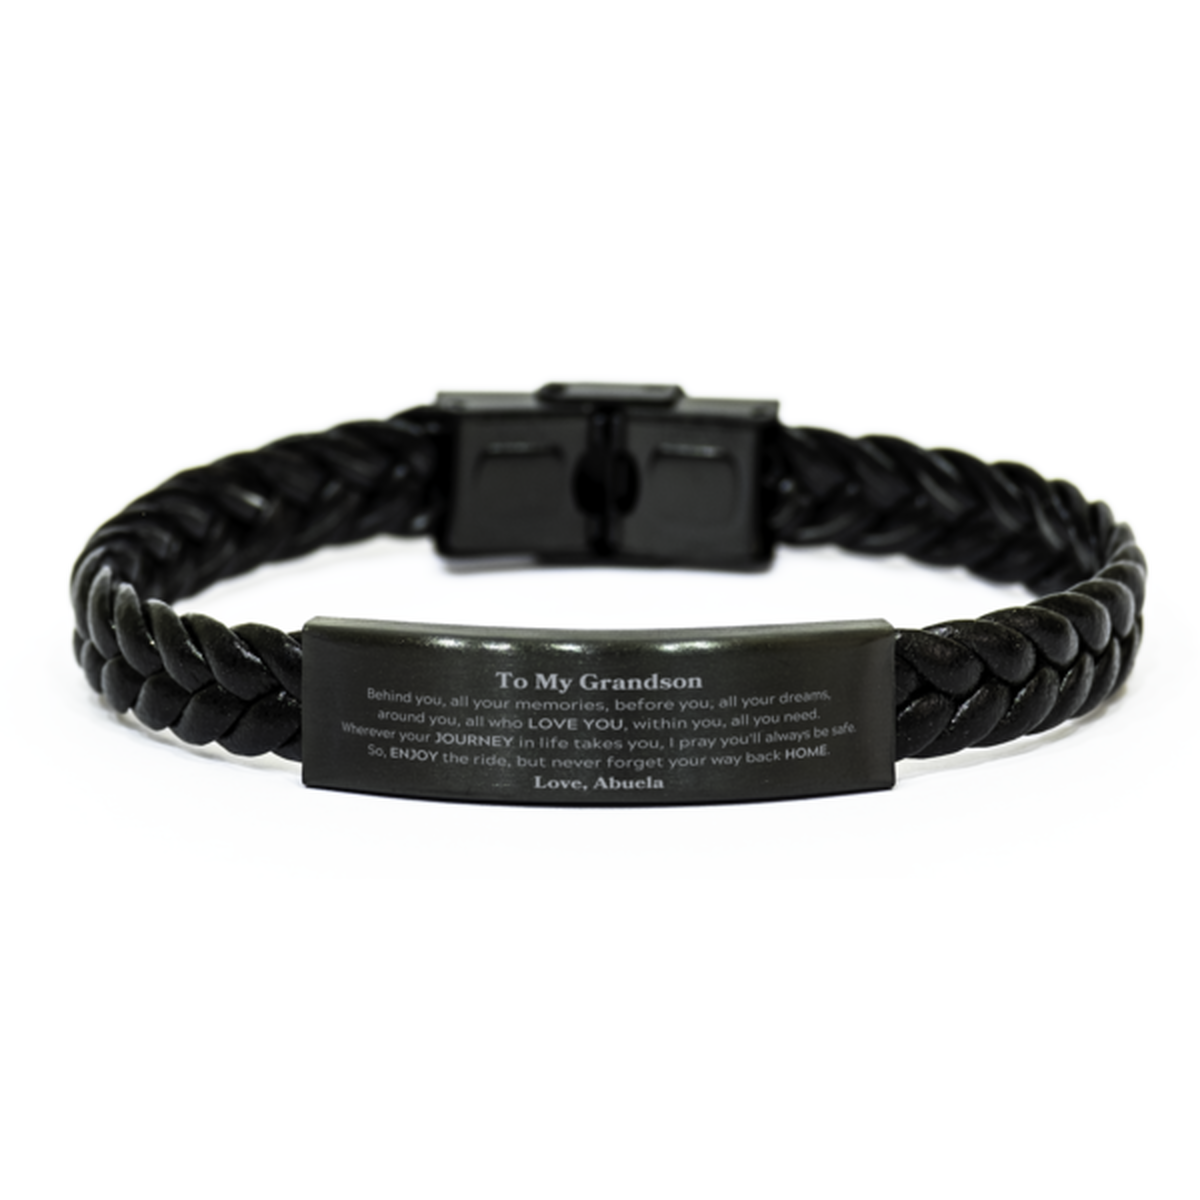 To My Grandson Graduation Gifts from Abuela, Grandson Braided Leather Bracelet Christmas Birthday Gifts for Grandson Behind you, all your memories, before you, all your dreams. Love, Abuela